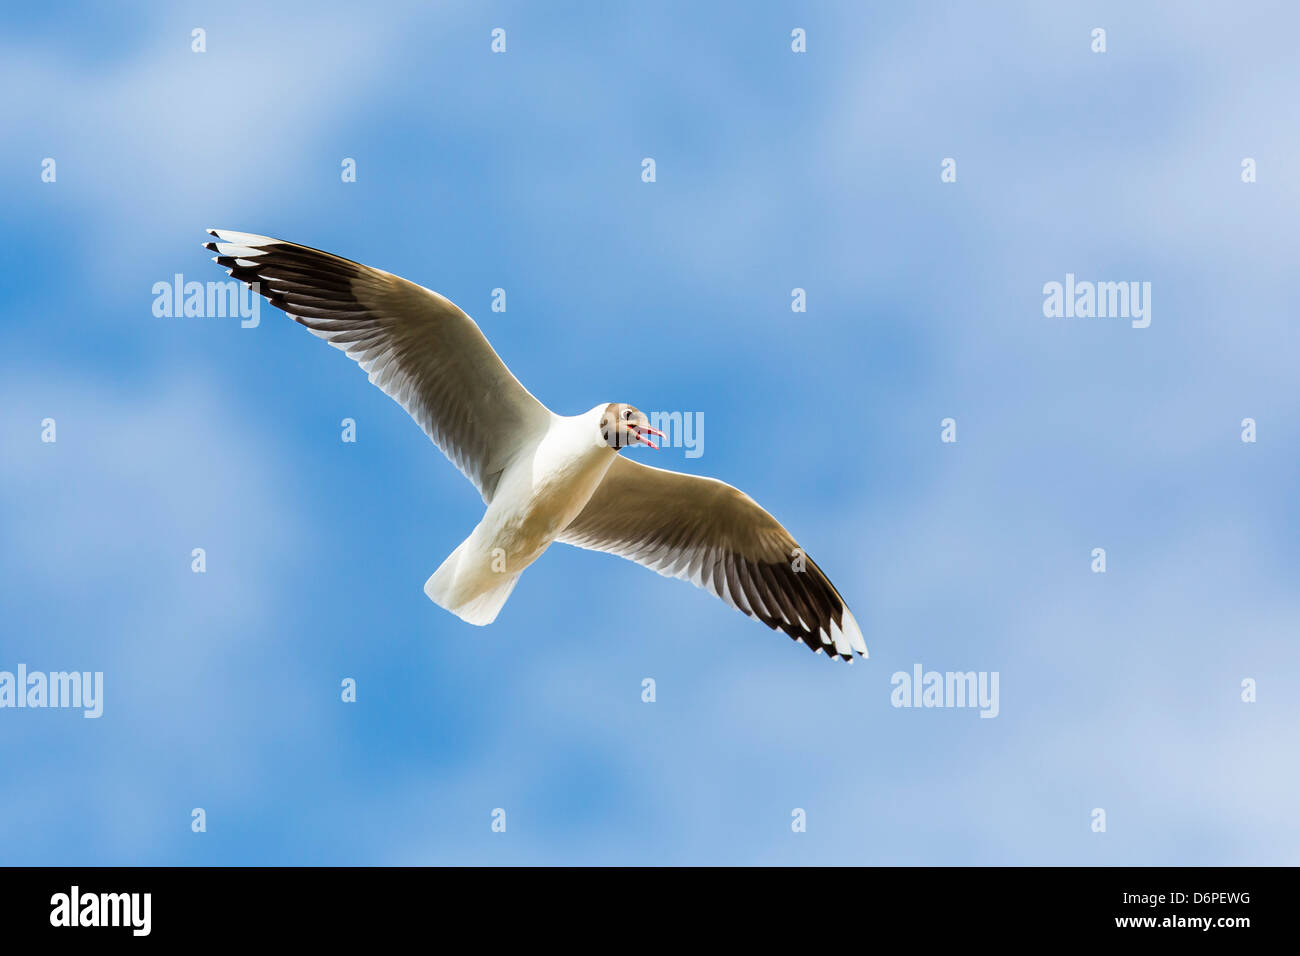 Adult brown-hooded gull (Larus maculipennis), Puerto Pyramides, Peninsula Valdes, Argentina, South America Stock Photo